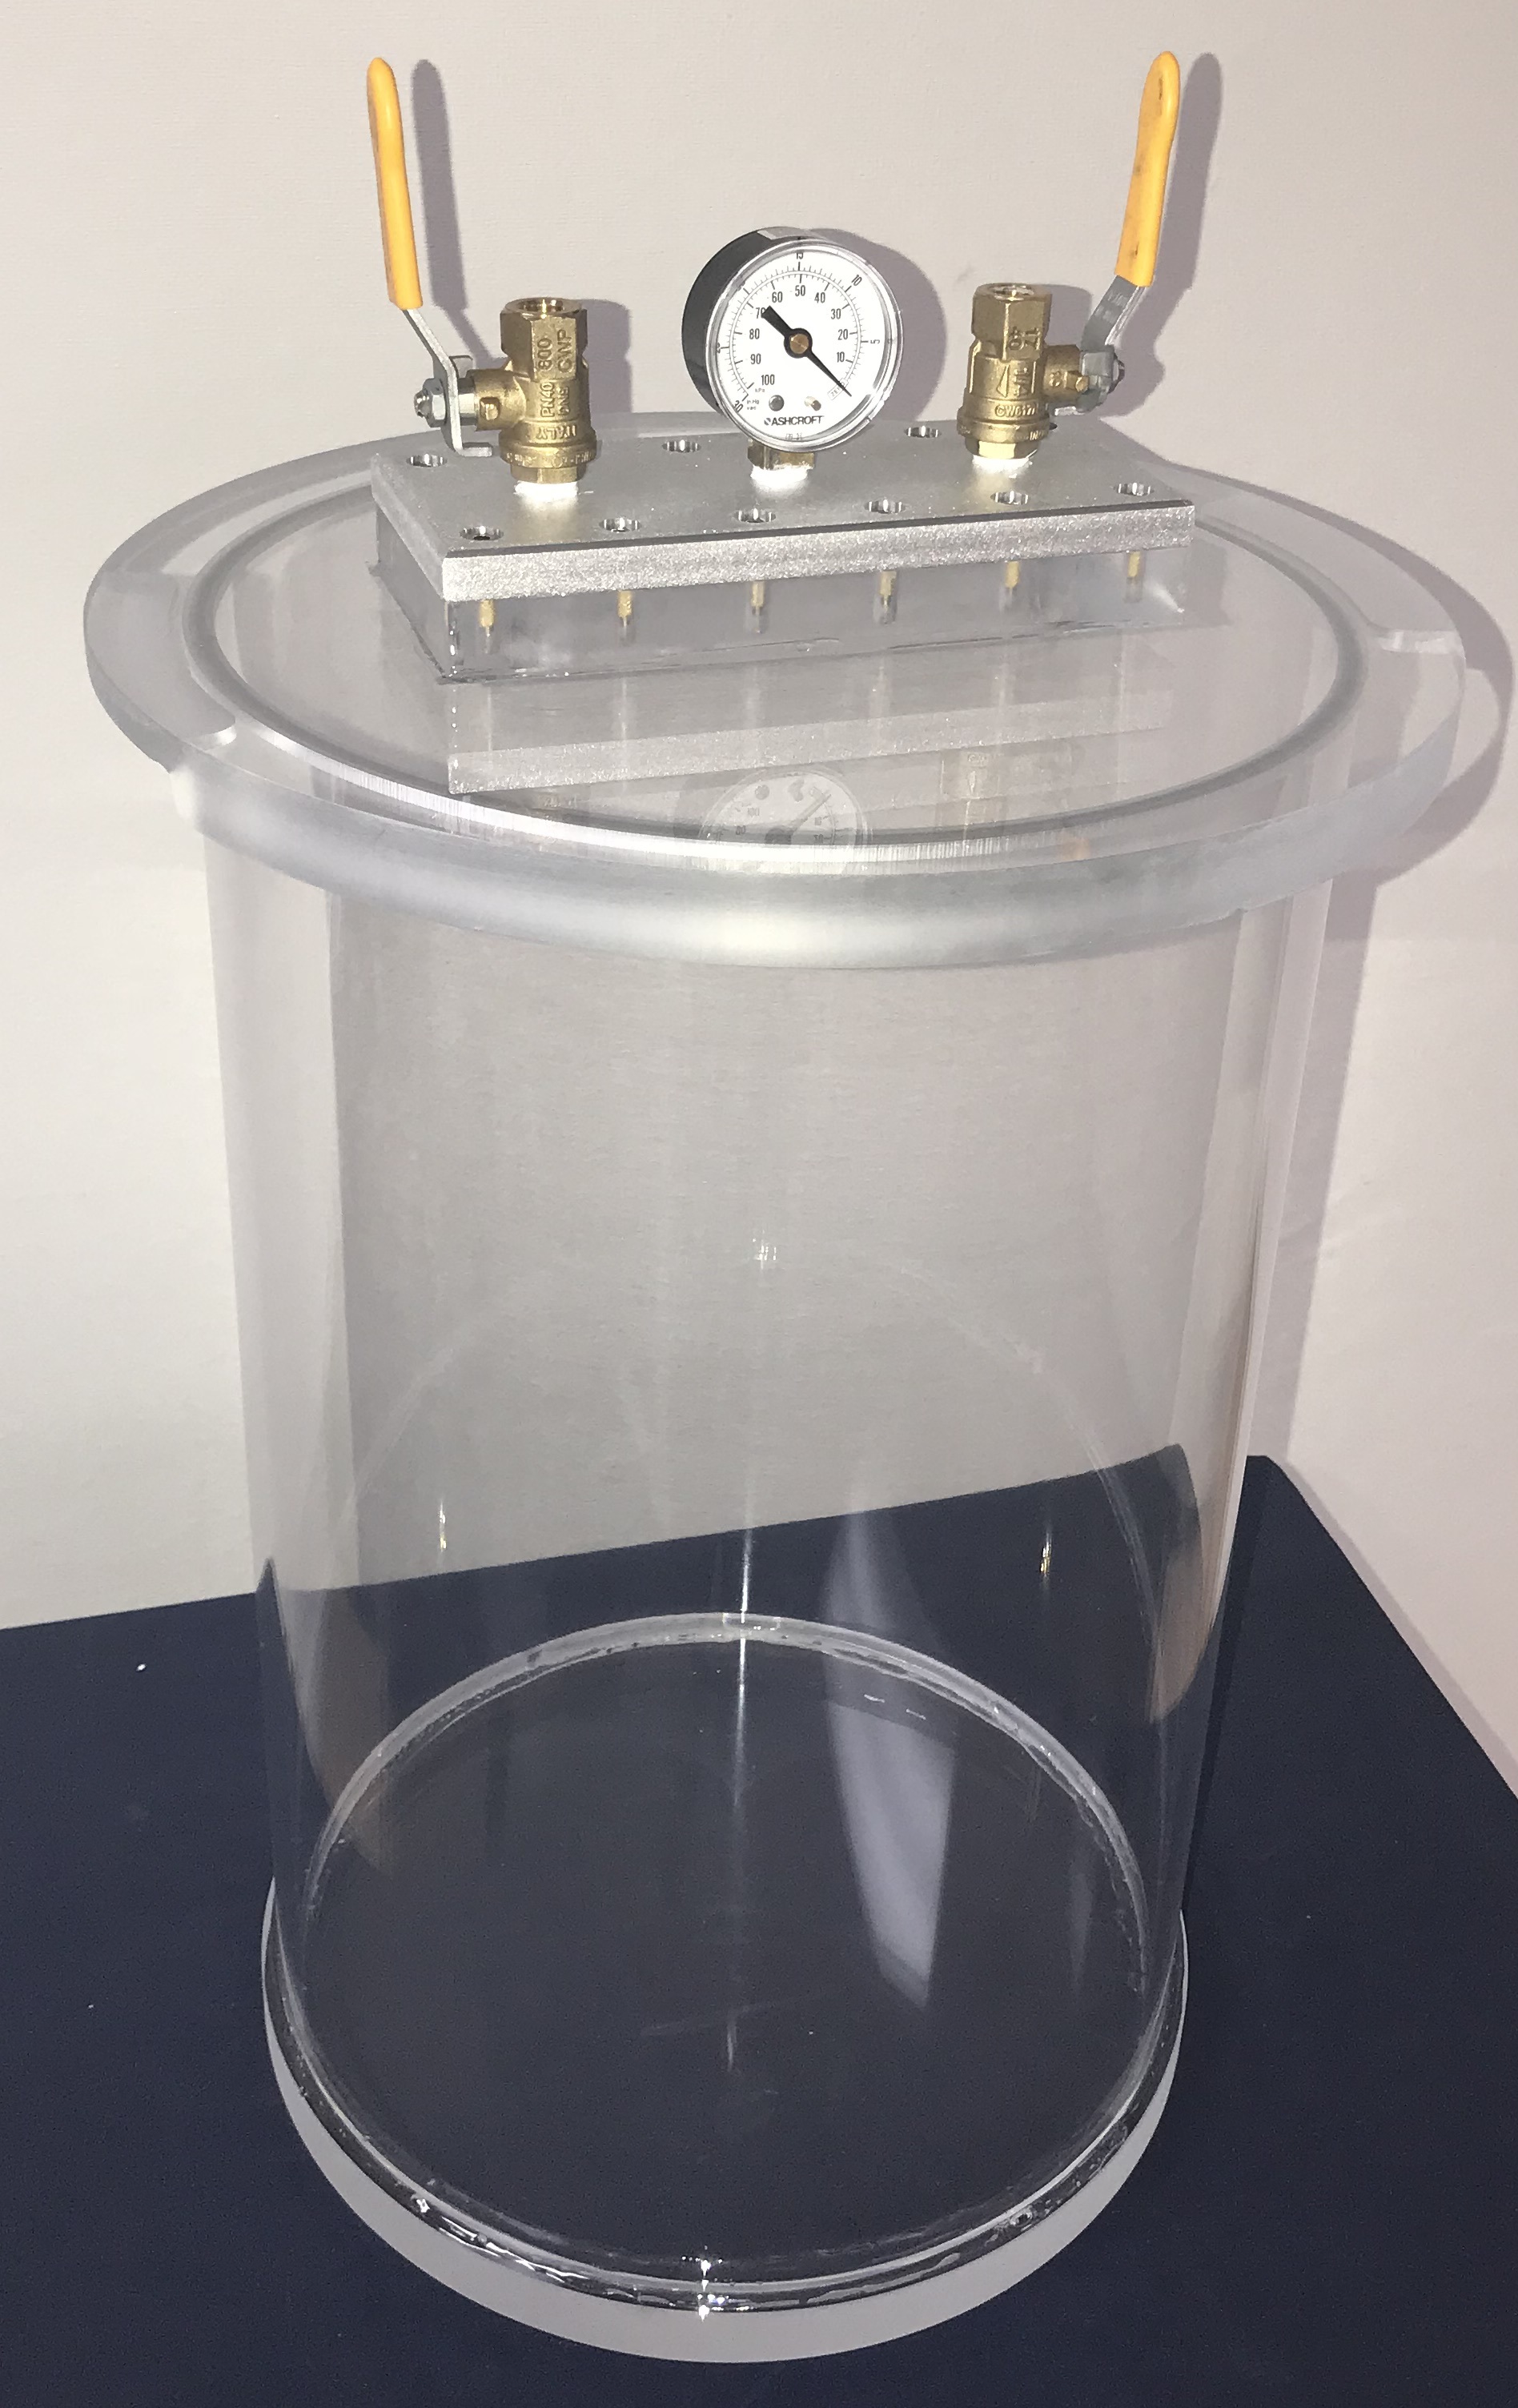 https://www.sanatron.com/products/images/crystalline-clear-vacuum-chamber-removable-lid.jpg